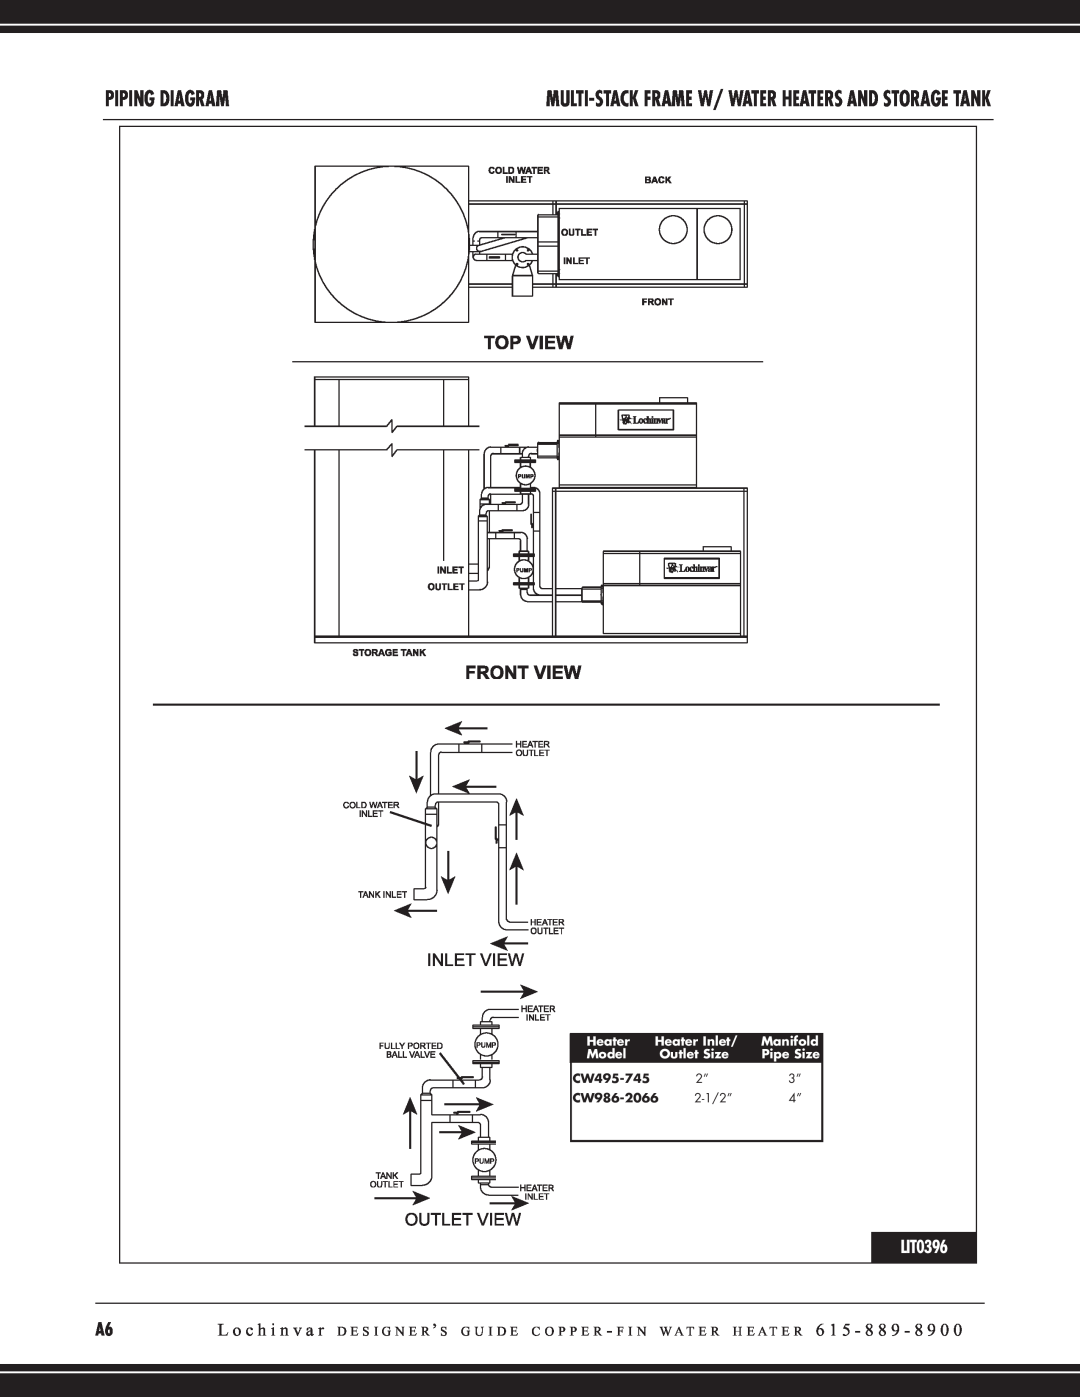 Lochinvar CW 745, CW 645 manual Piping Diagram, LIT0396, Heater Inlet, Manifold, Model, Outlet Size, Pipe Size 